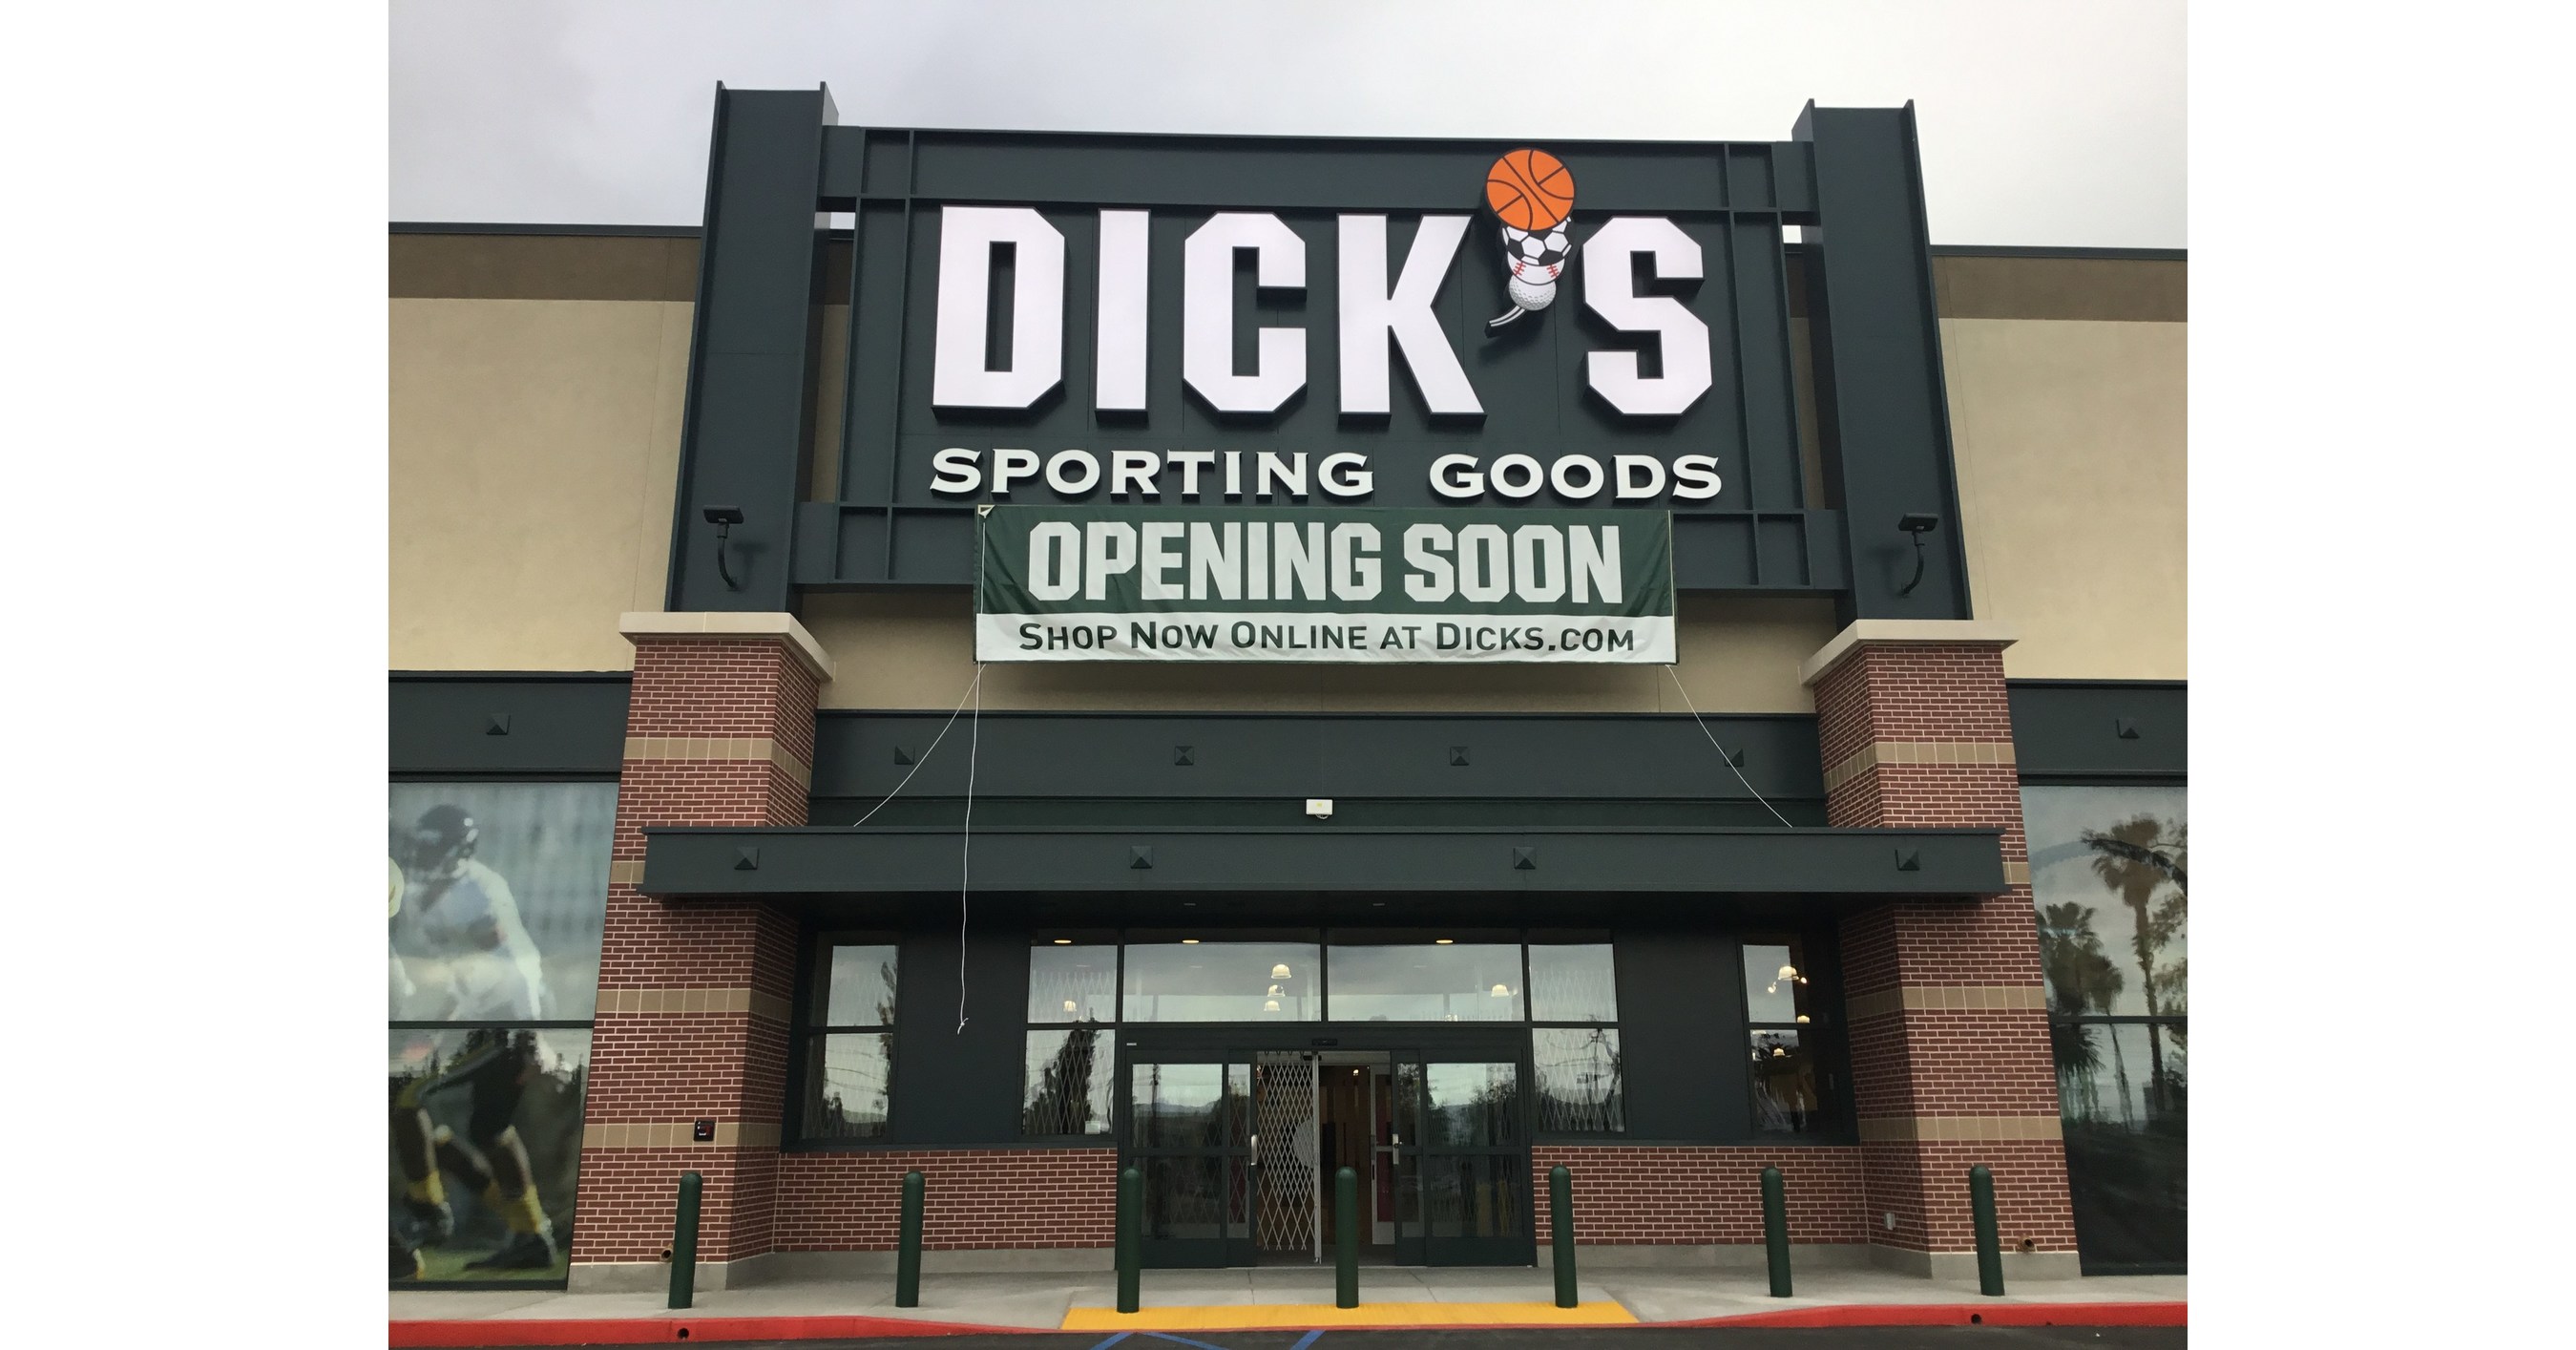 Dicks Sporting Goods Announces Grand Opening Of Four Stores In Four States Including A New 